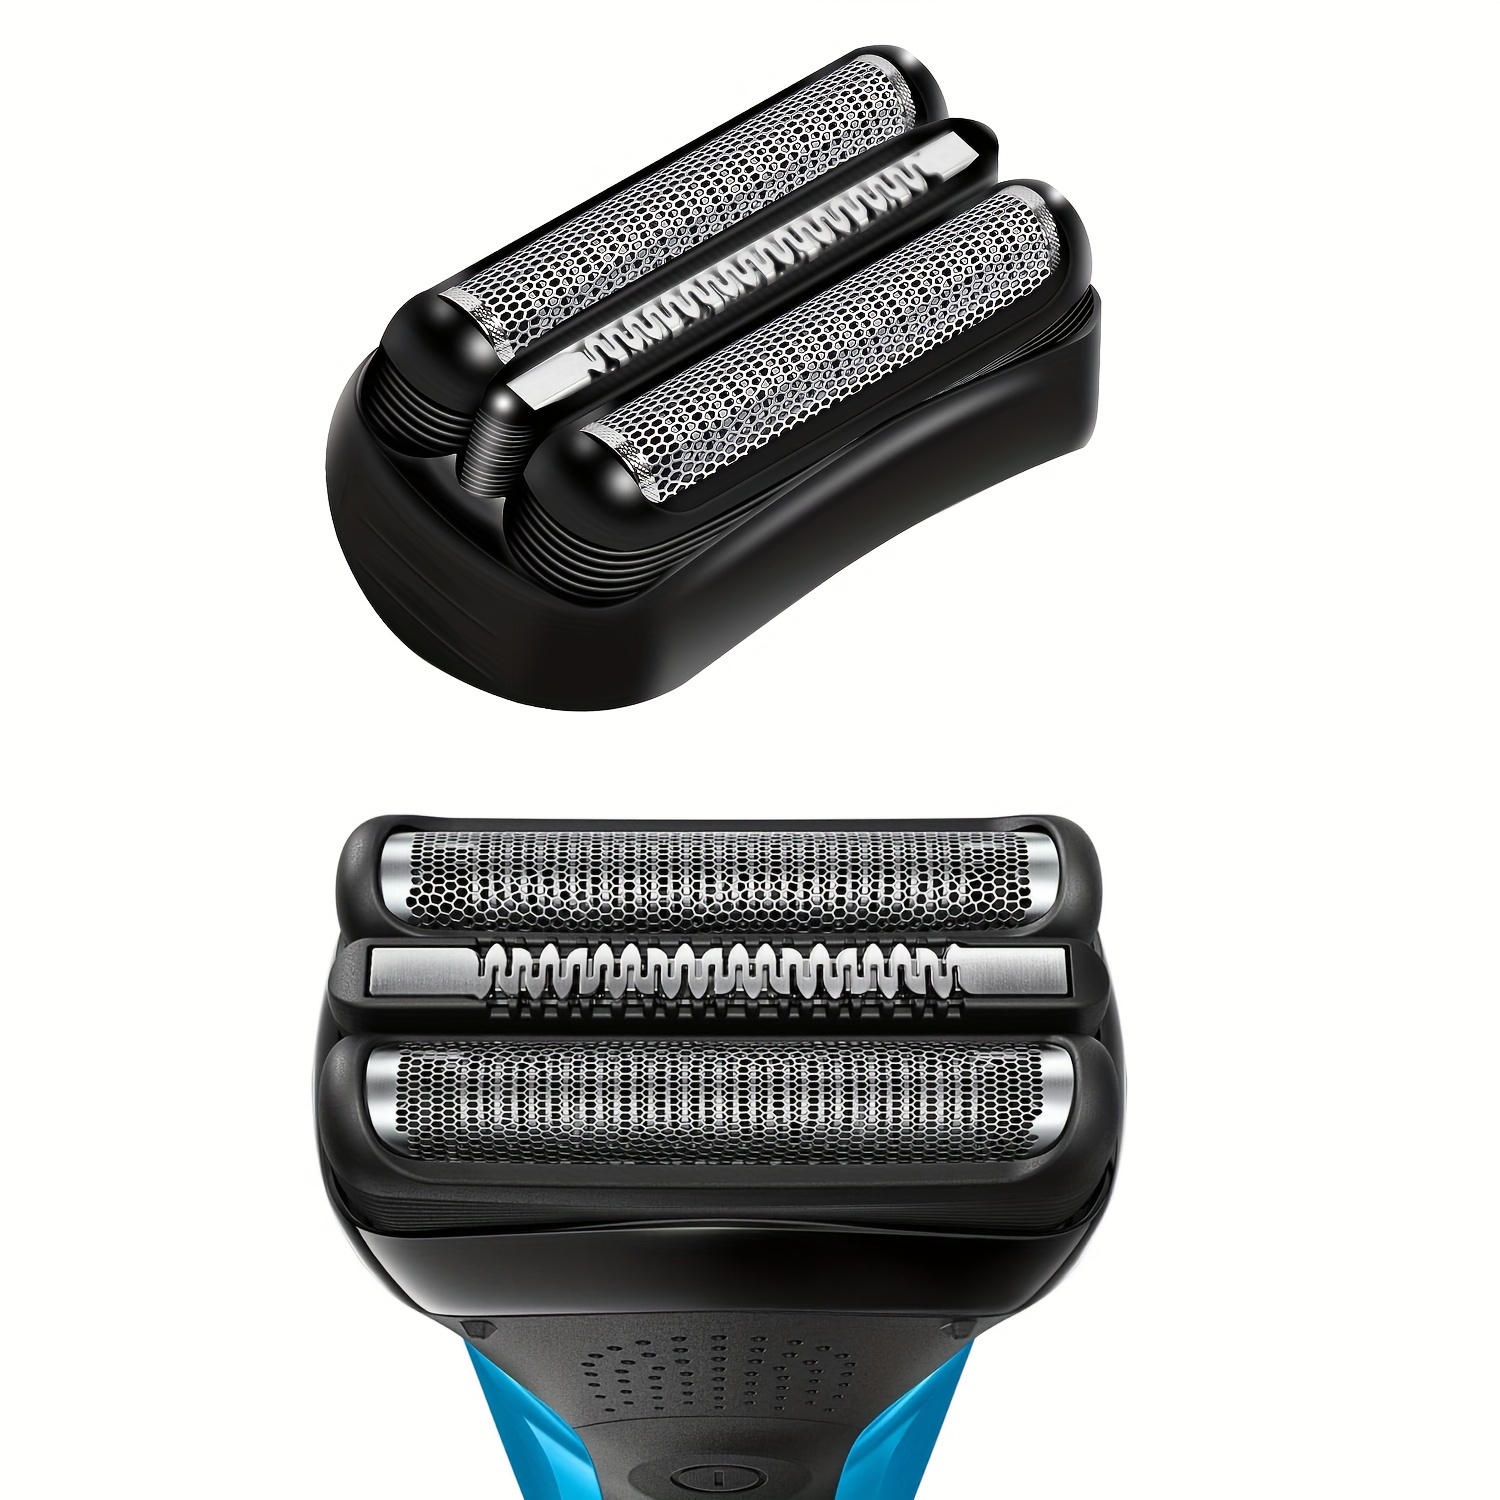 Braun Series 3 Electric Shaver Replacement Head - 21b - Compatible